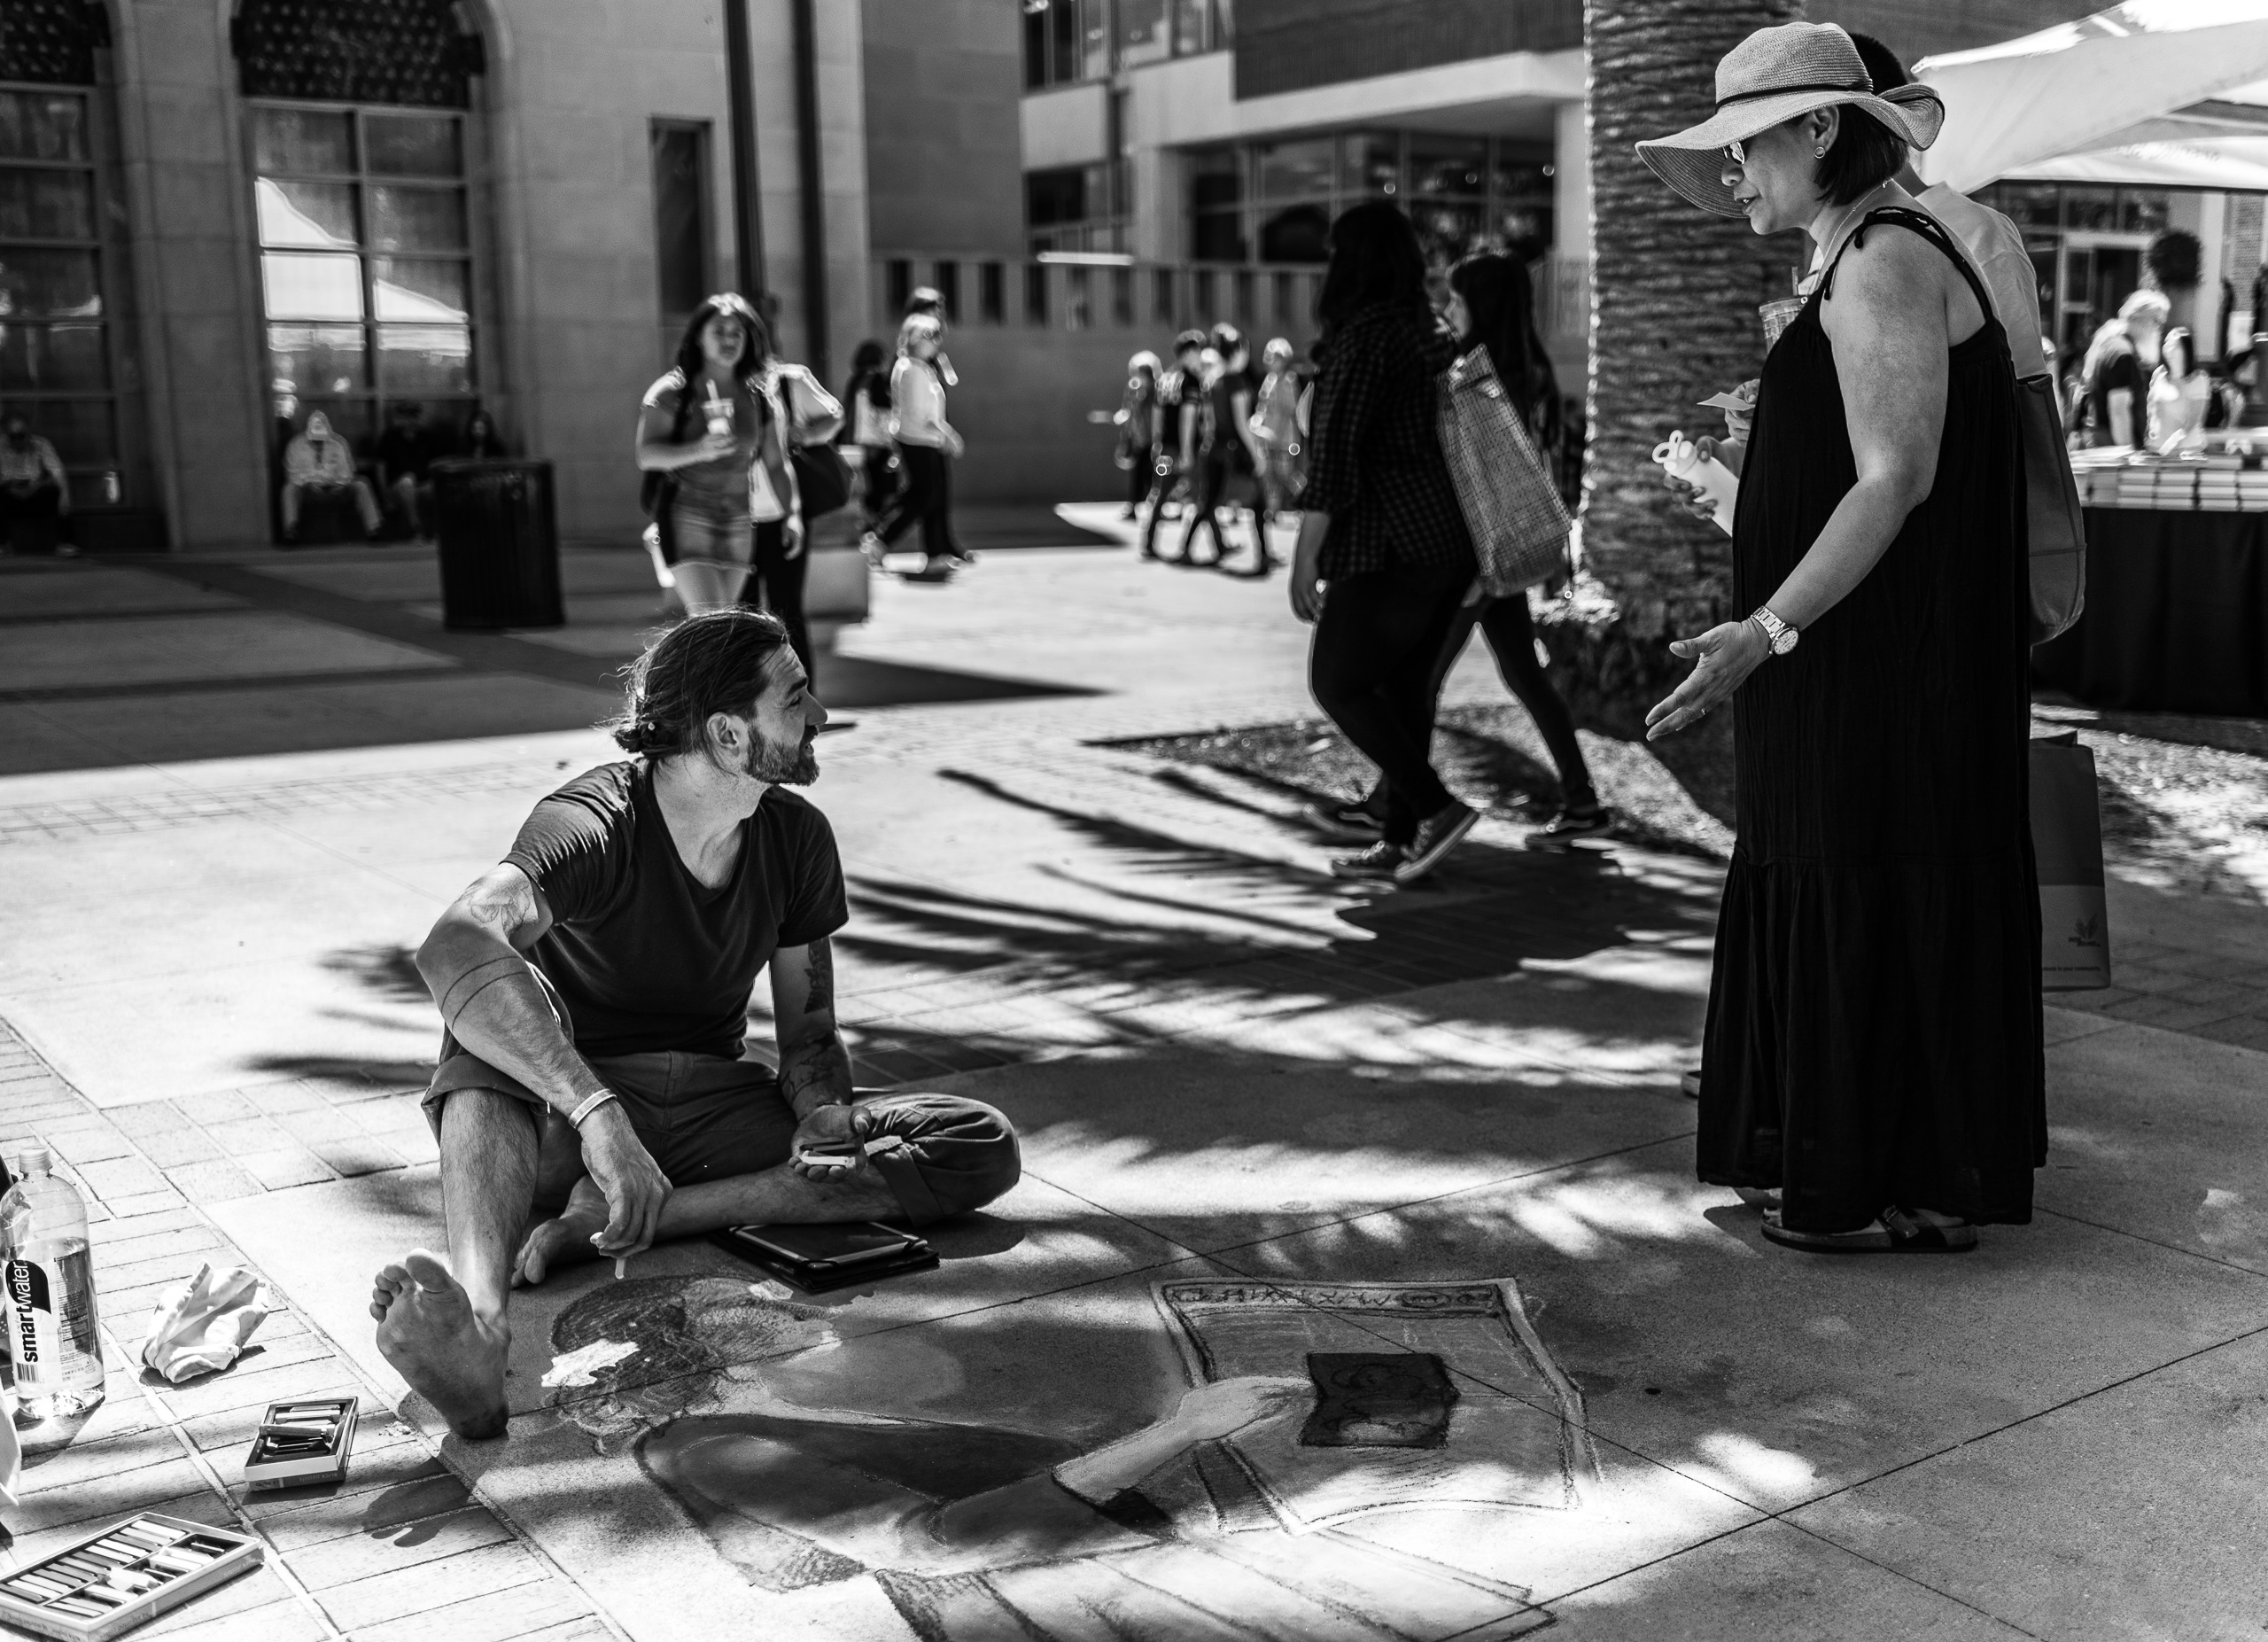 a chalk artist sits on the ground at the University of Southern California campus and works on a chalk/pastel illustration of a young girl in a dress reading the newspaper. A woman gestures toward the artist and tells him how amazing his work is.